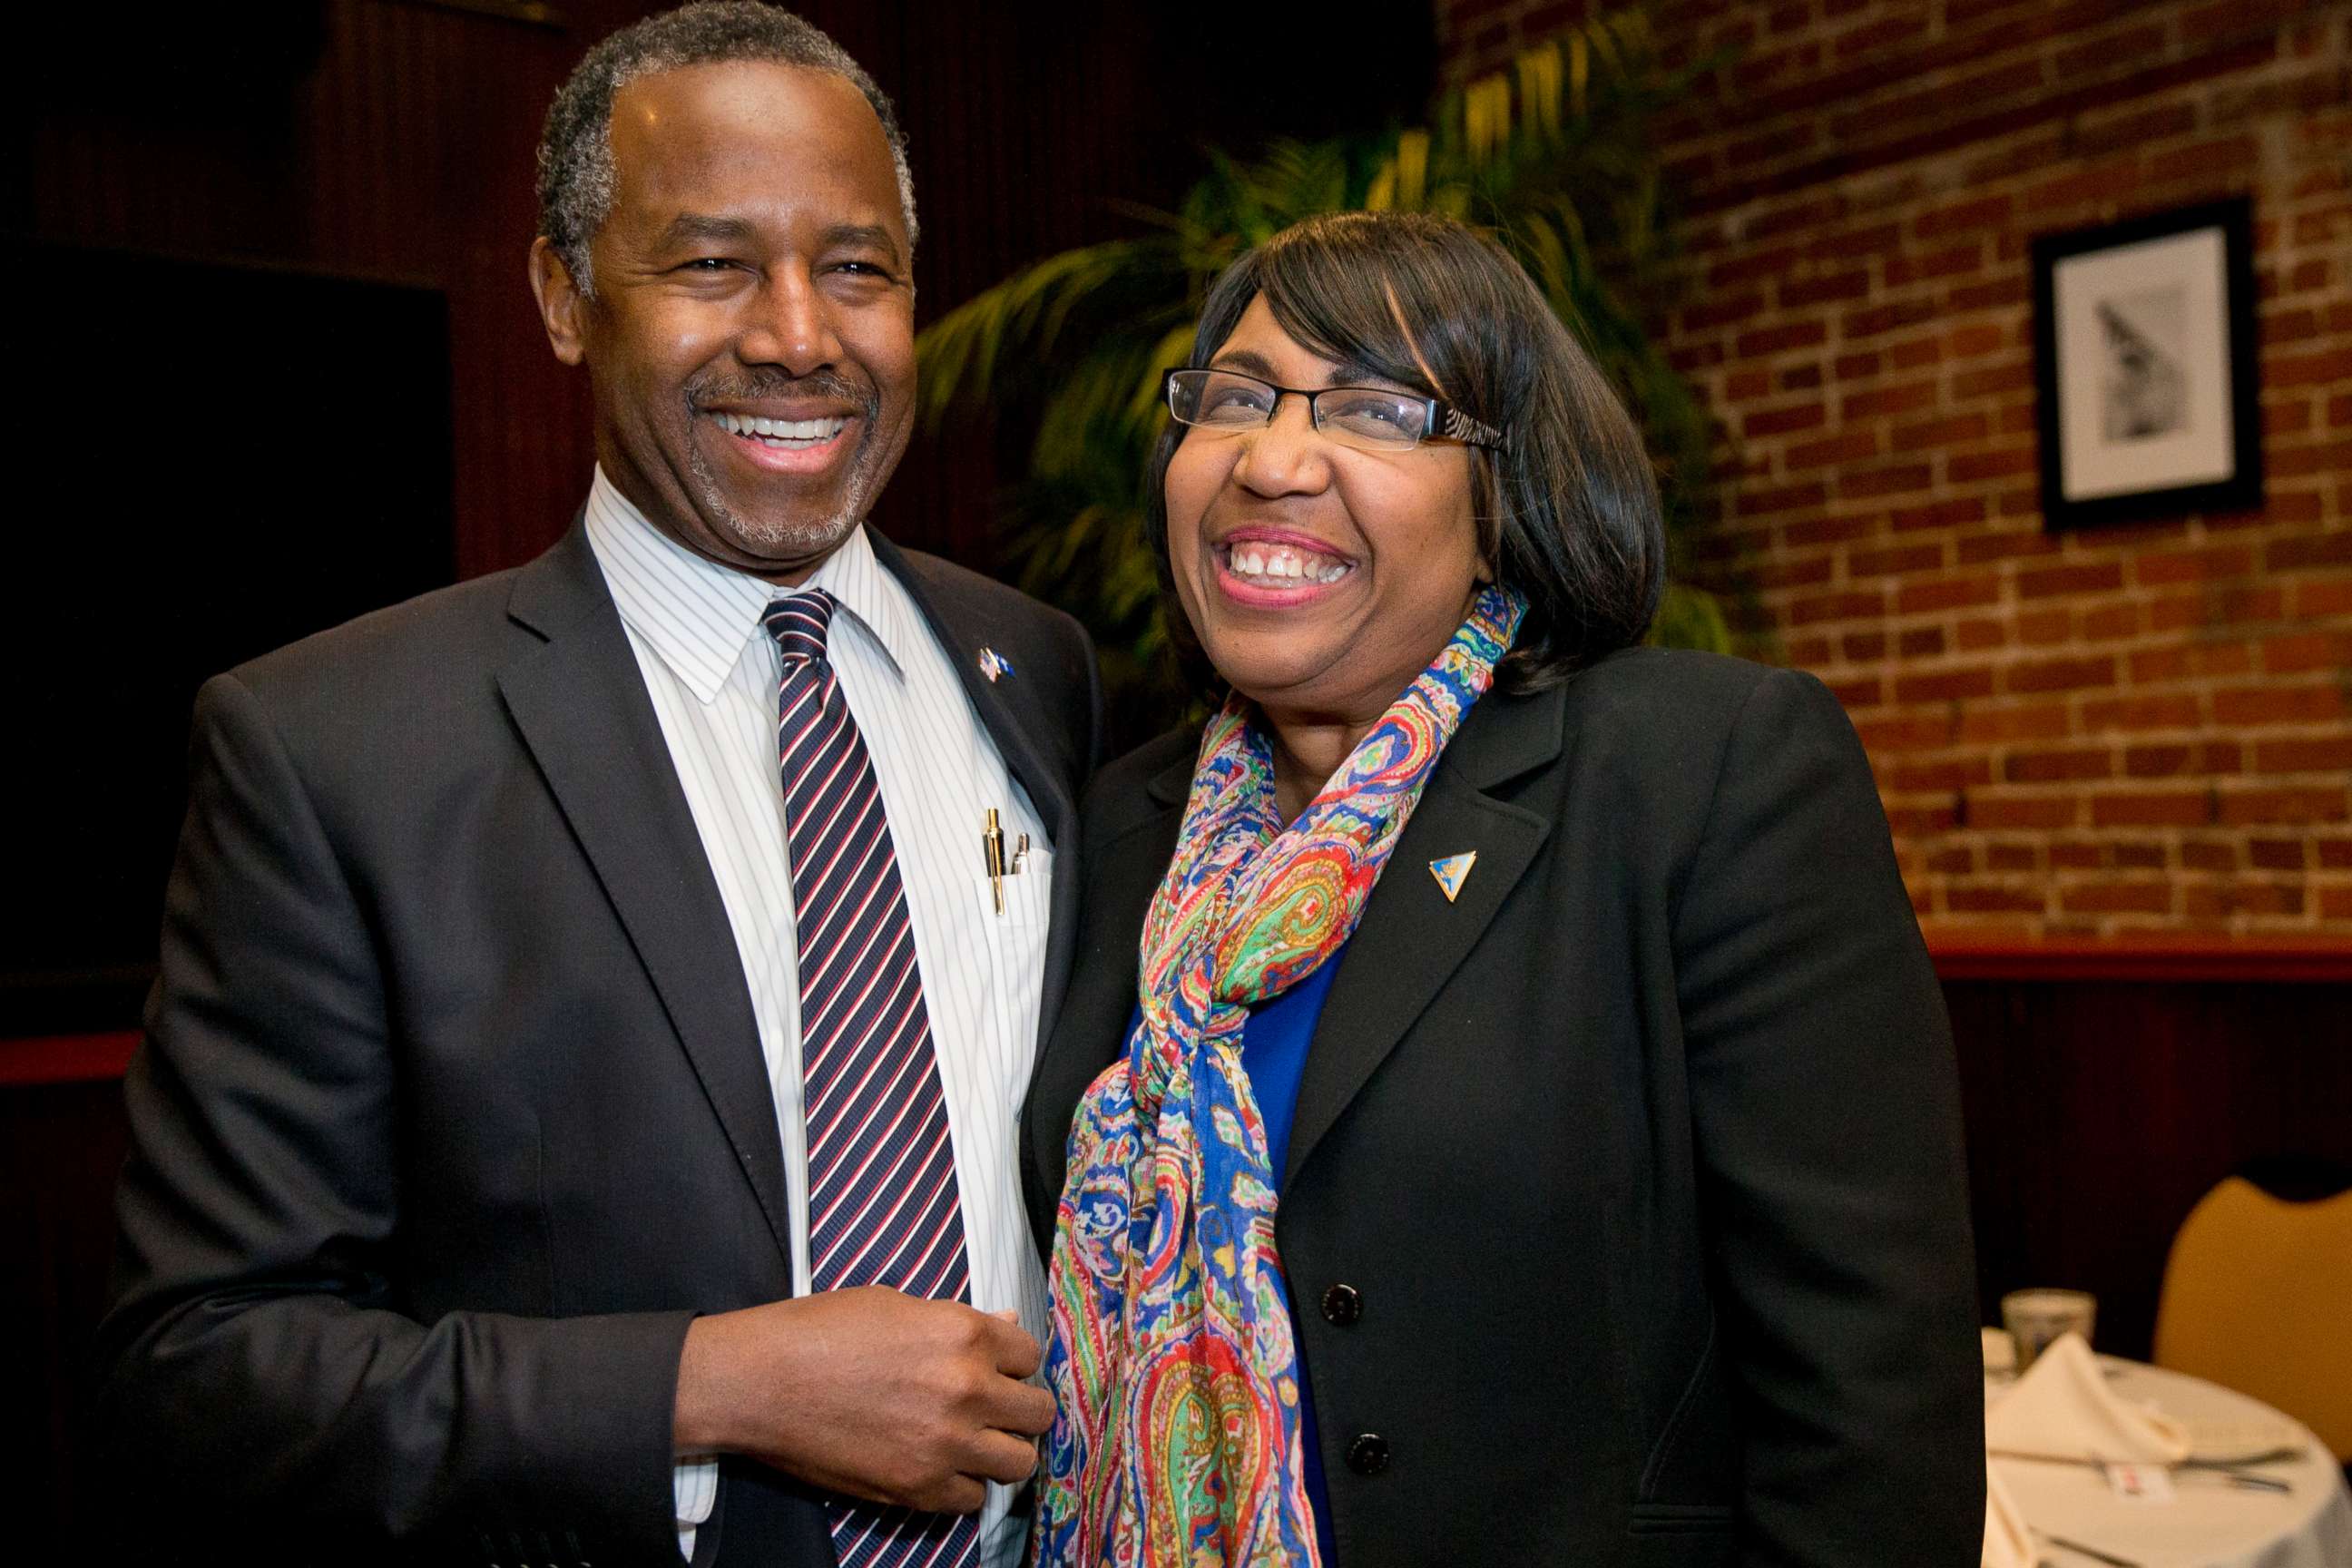 PHOTO: Ben Carson spends a moment with his wife Candy Carson as she arrives for a Valentine's Day dinner at the Blue Marlin restaurant in Columbia, S.C., Feb. 14, 2016.